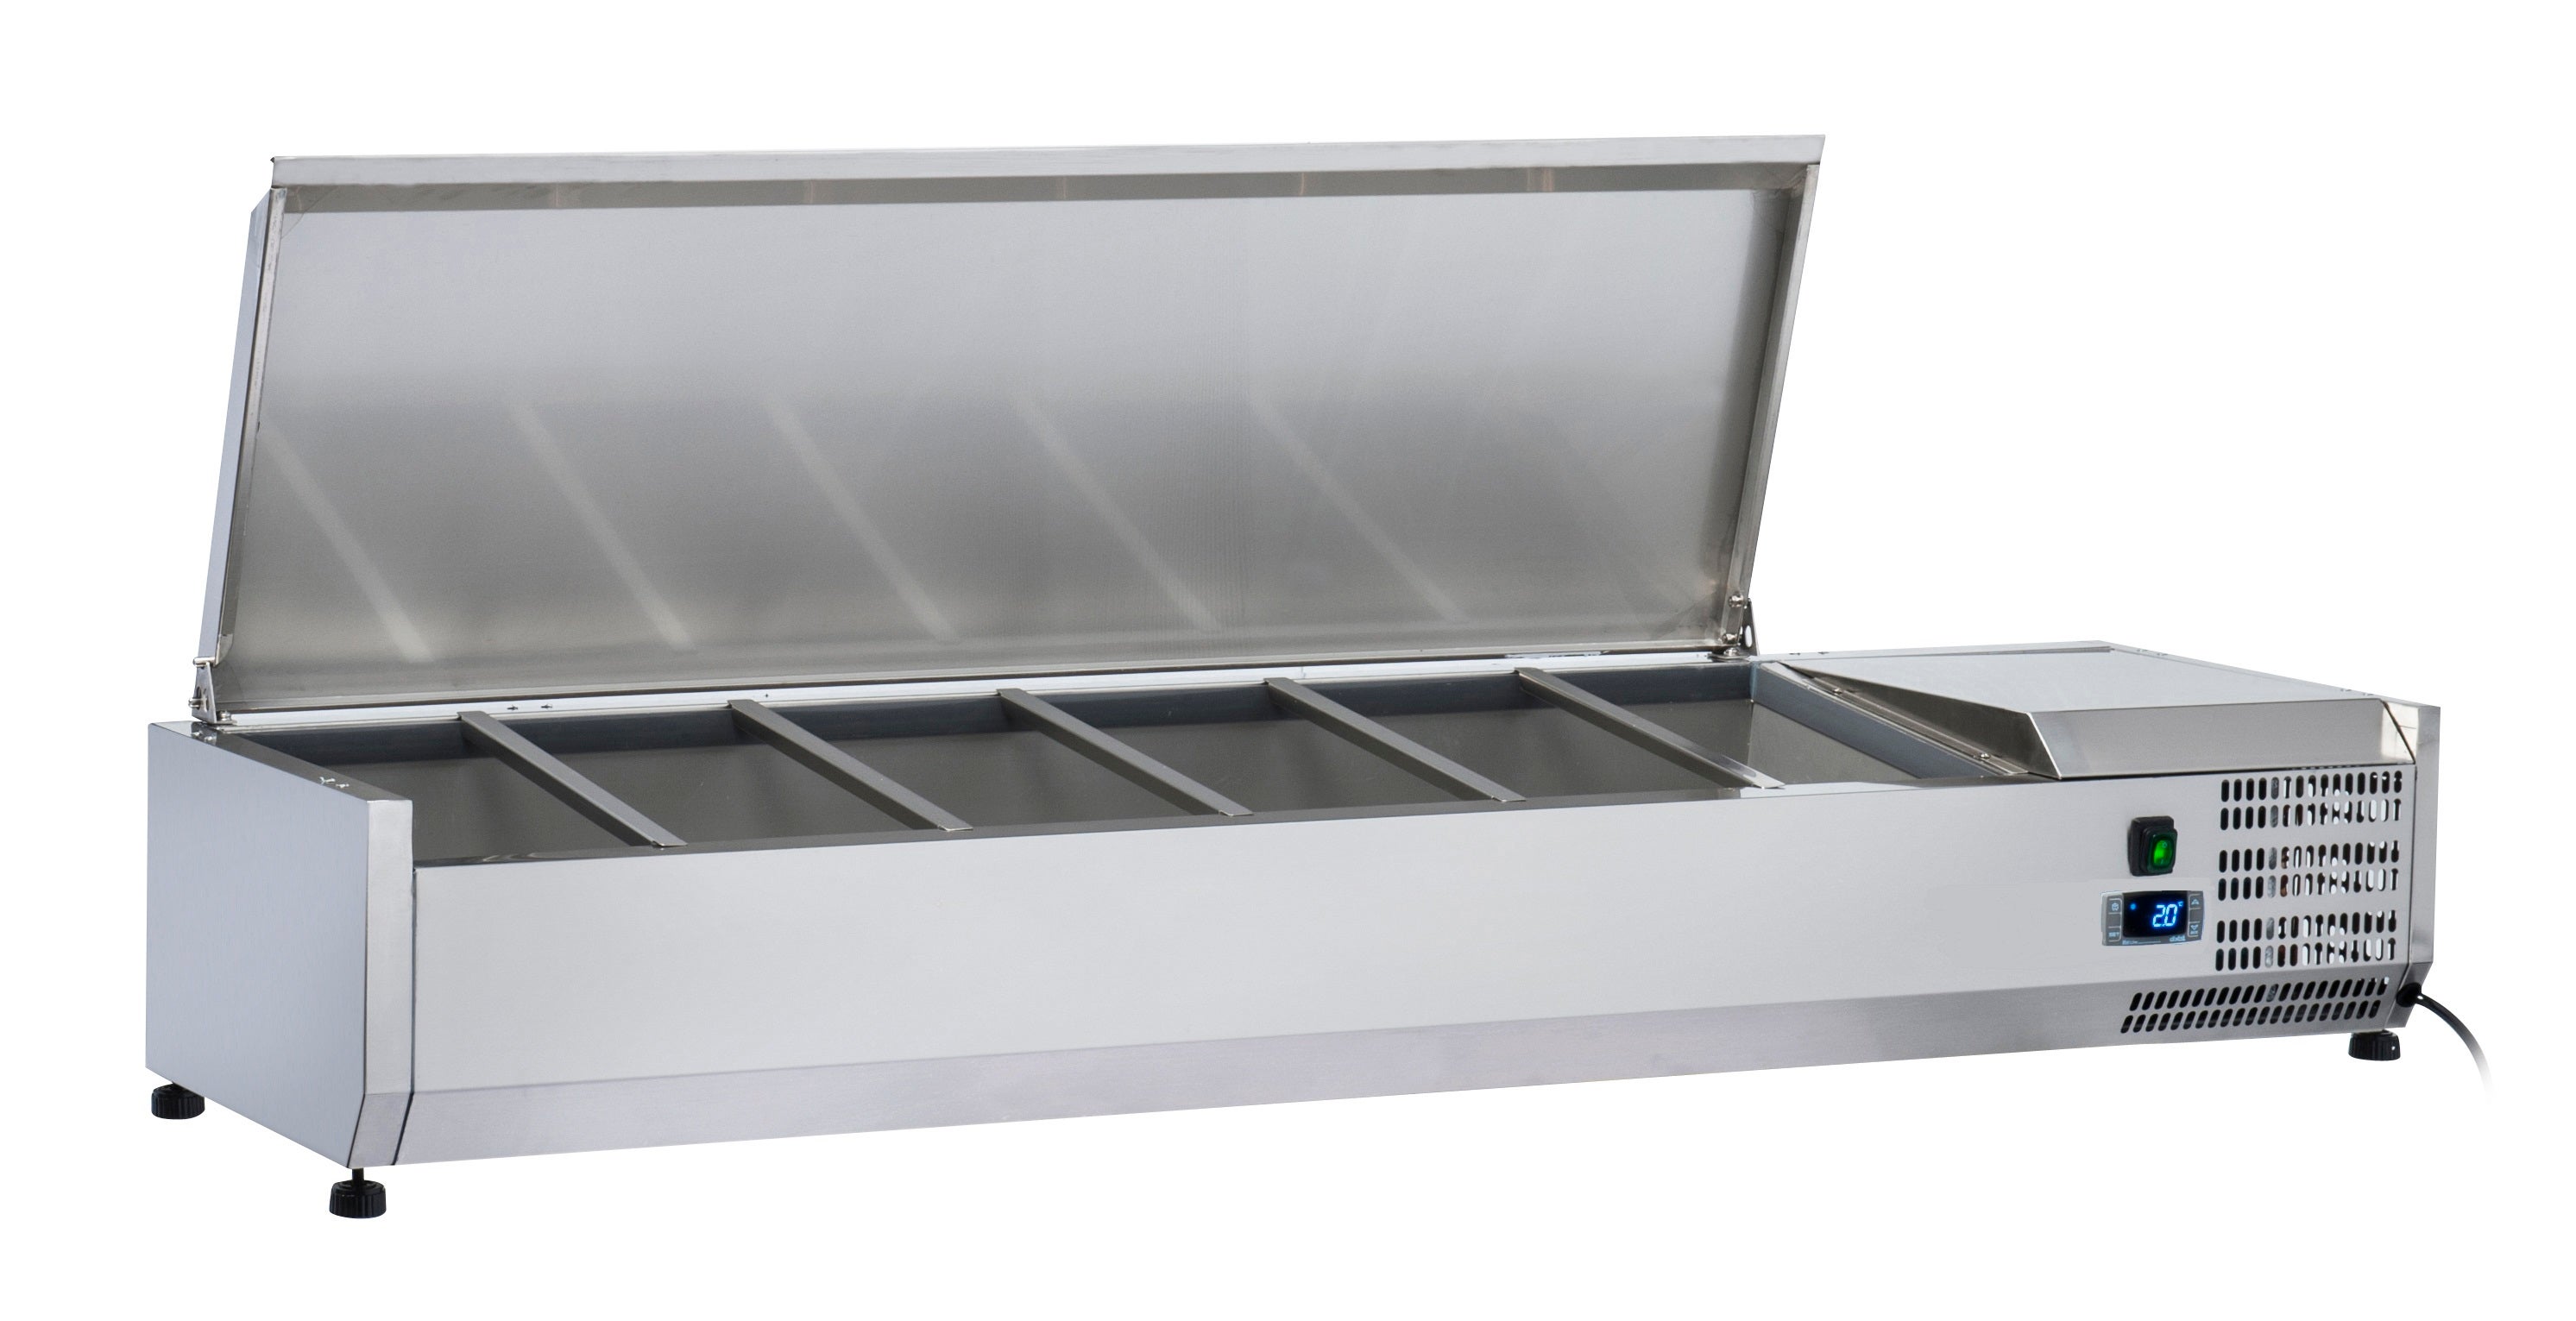 Anvil Aire 1200 Stainless Steel Lid Refrigerated Ingredient Well ICE-VRX1200S Countertop Prep Fridges